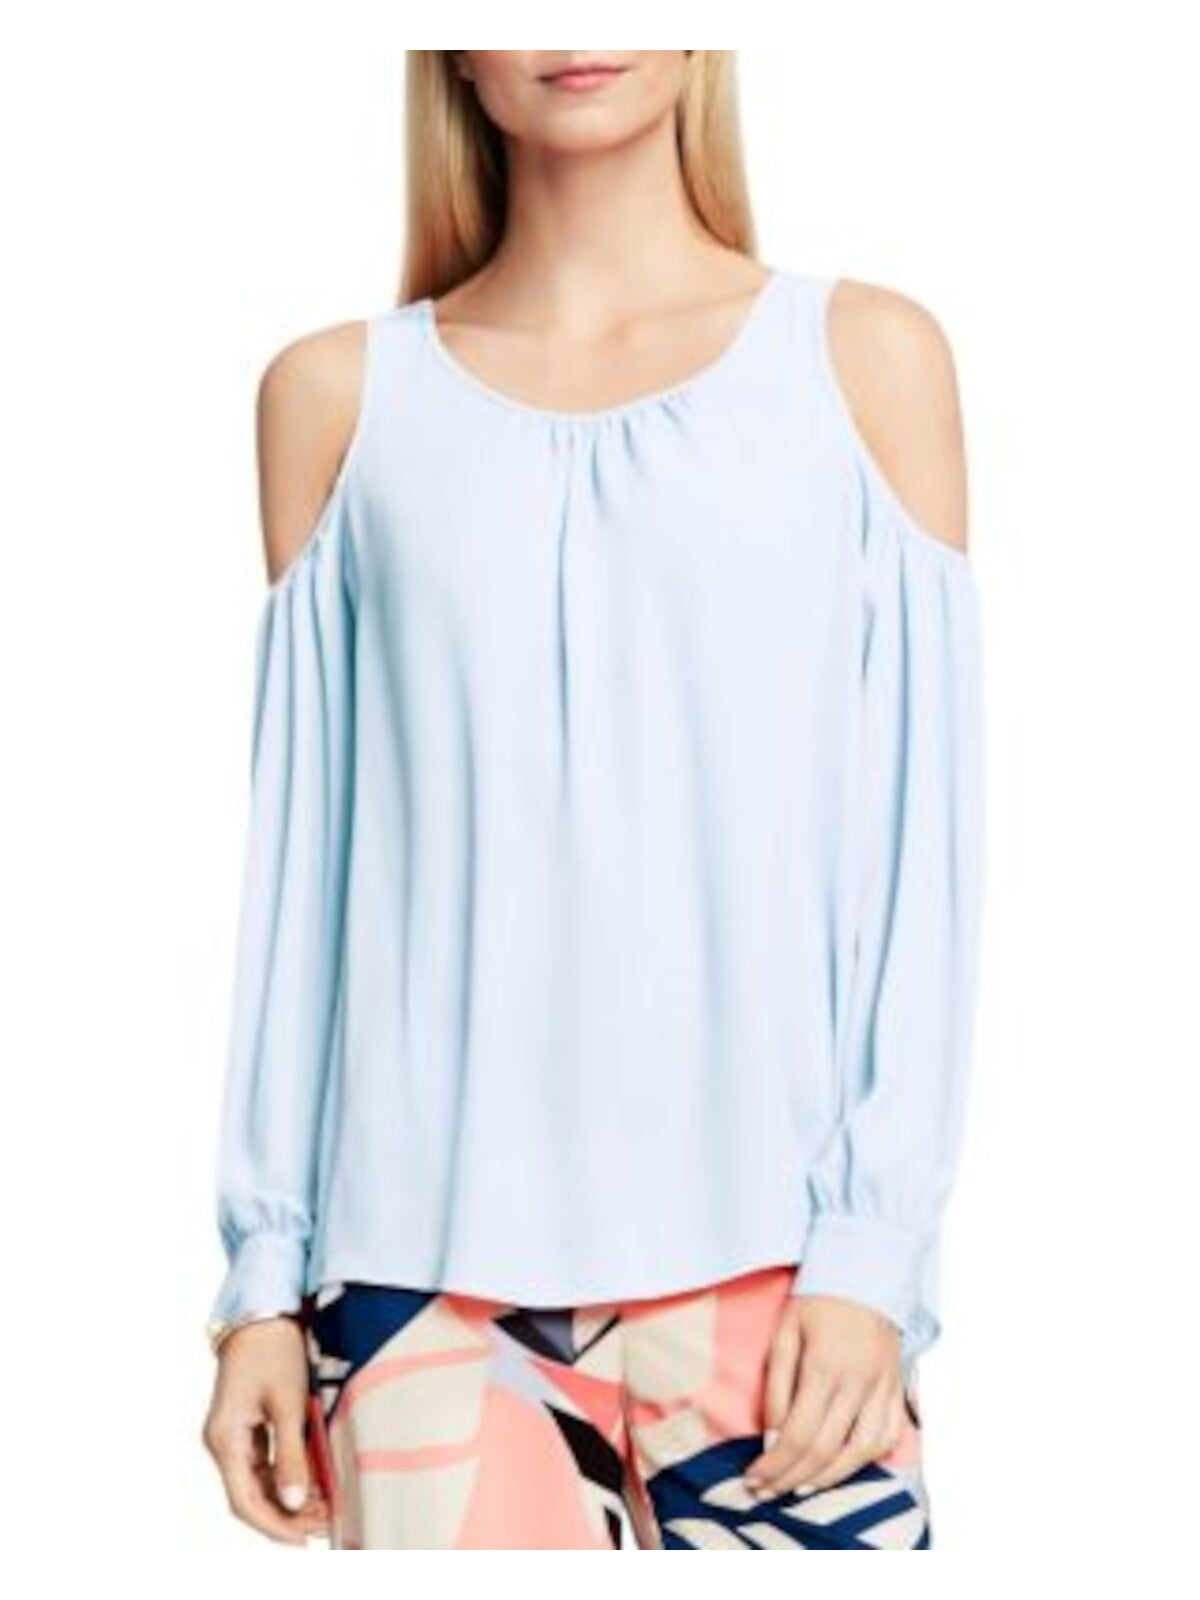 VINCE CAMUTO Womens Light Blue Cold Shoulder Keyhole Back Button Closure Cuffed Sleeve Round Neck Peasant Top M